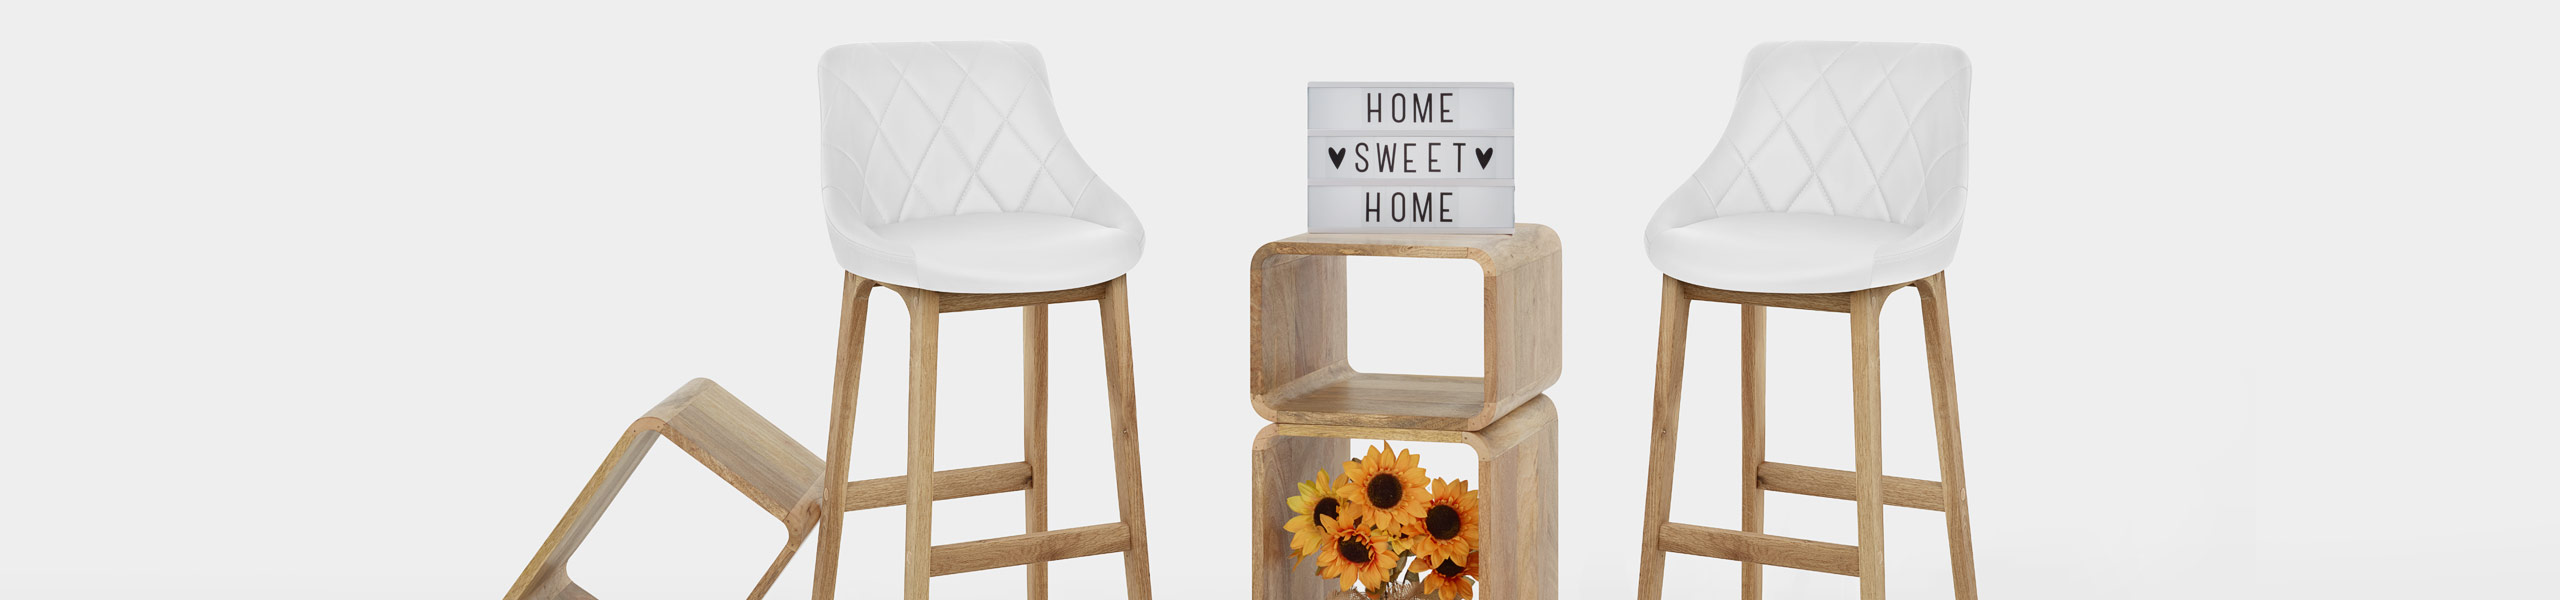 Breeze Wooden Stool White Video Banner